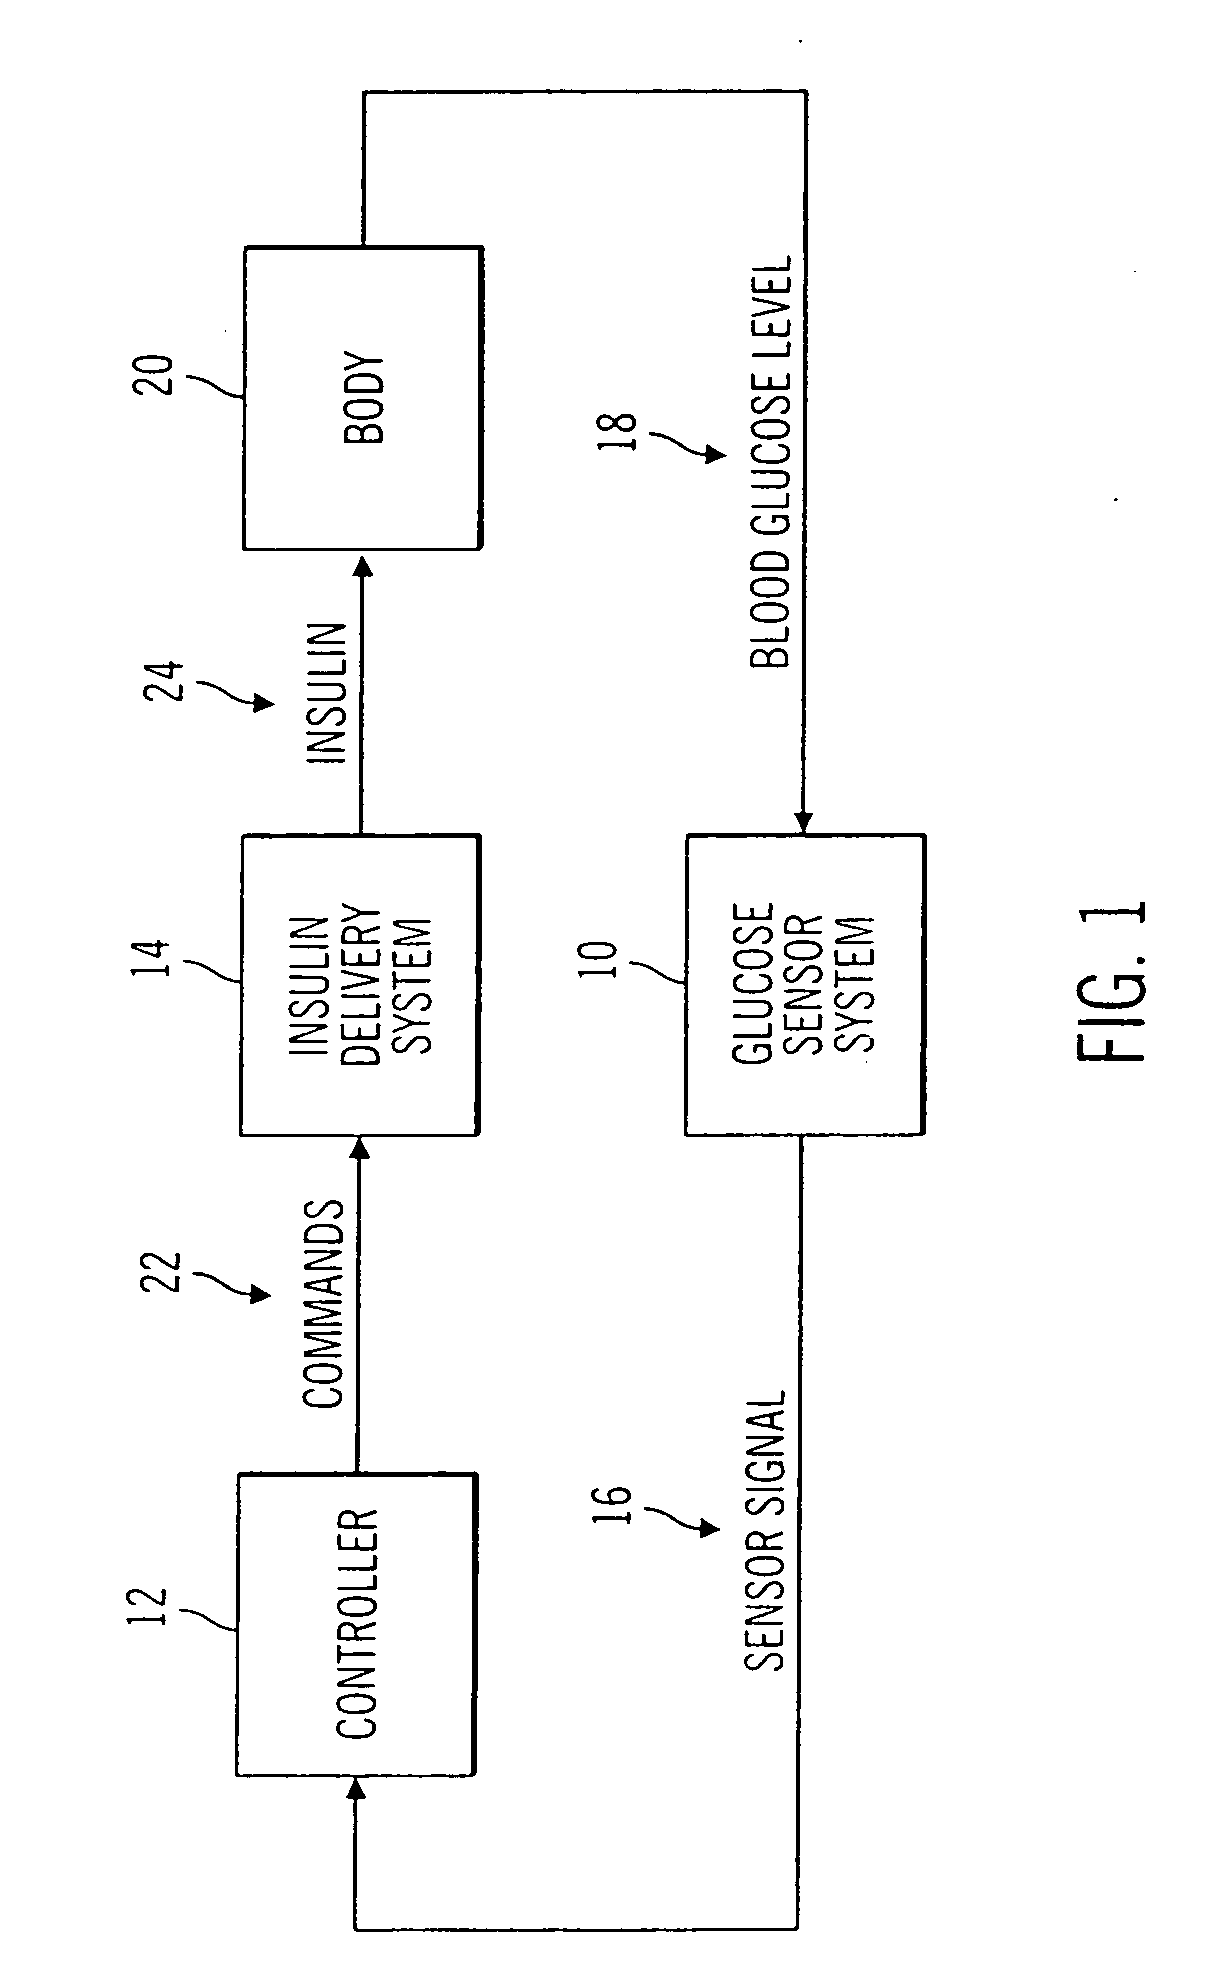 Closed loop system for controlling insulin infusion